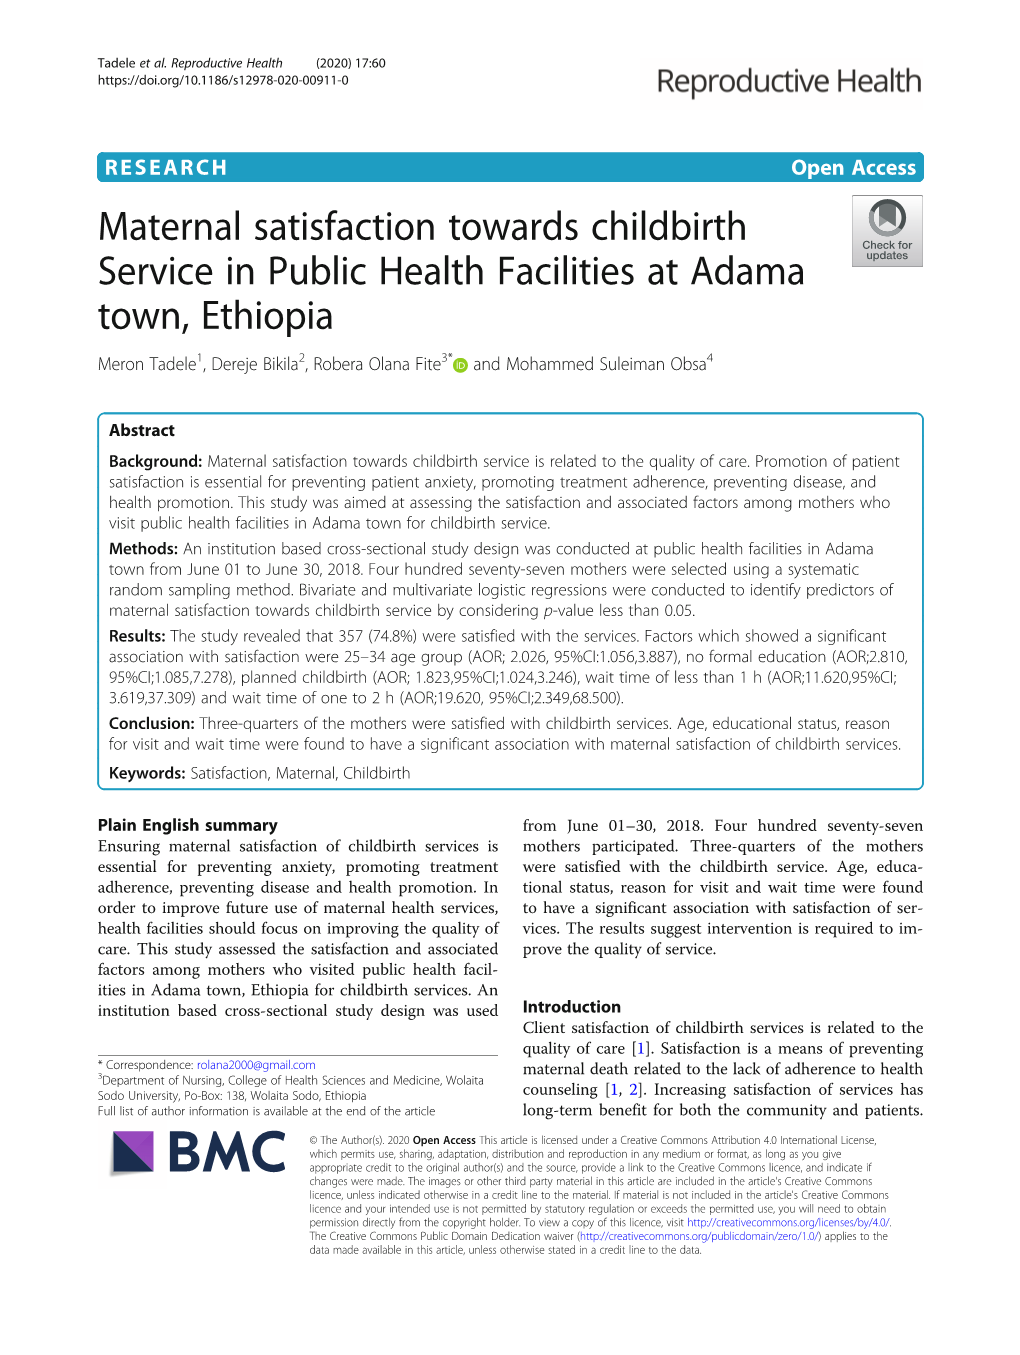 Maternal Satisfaction Towards Childbirth Service in Public Health